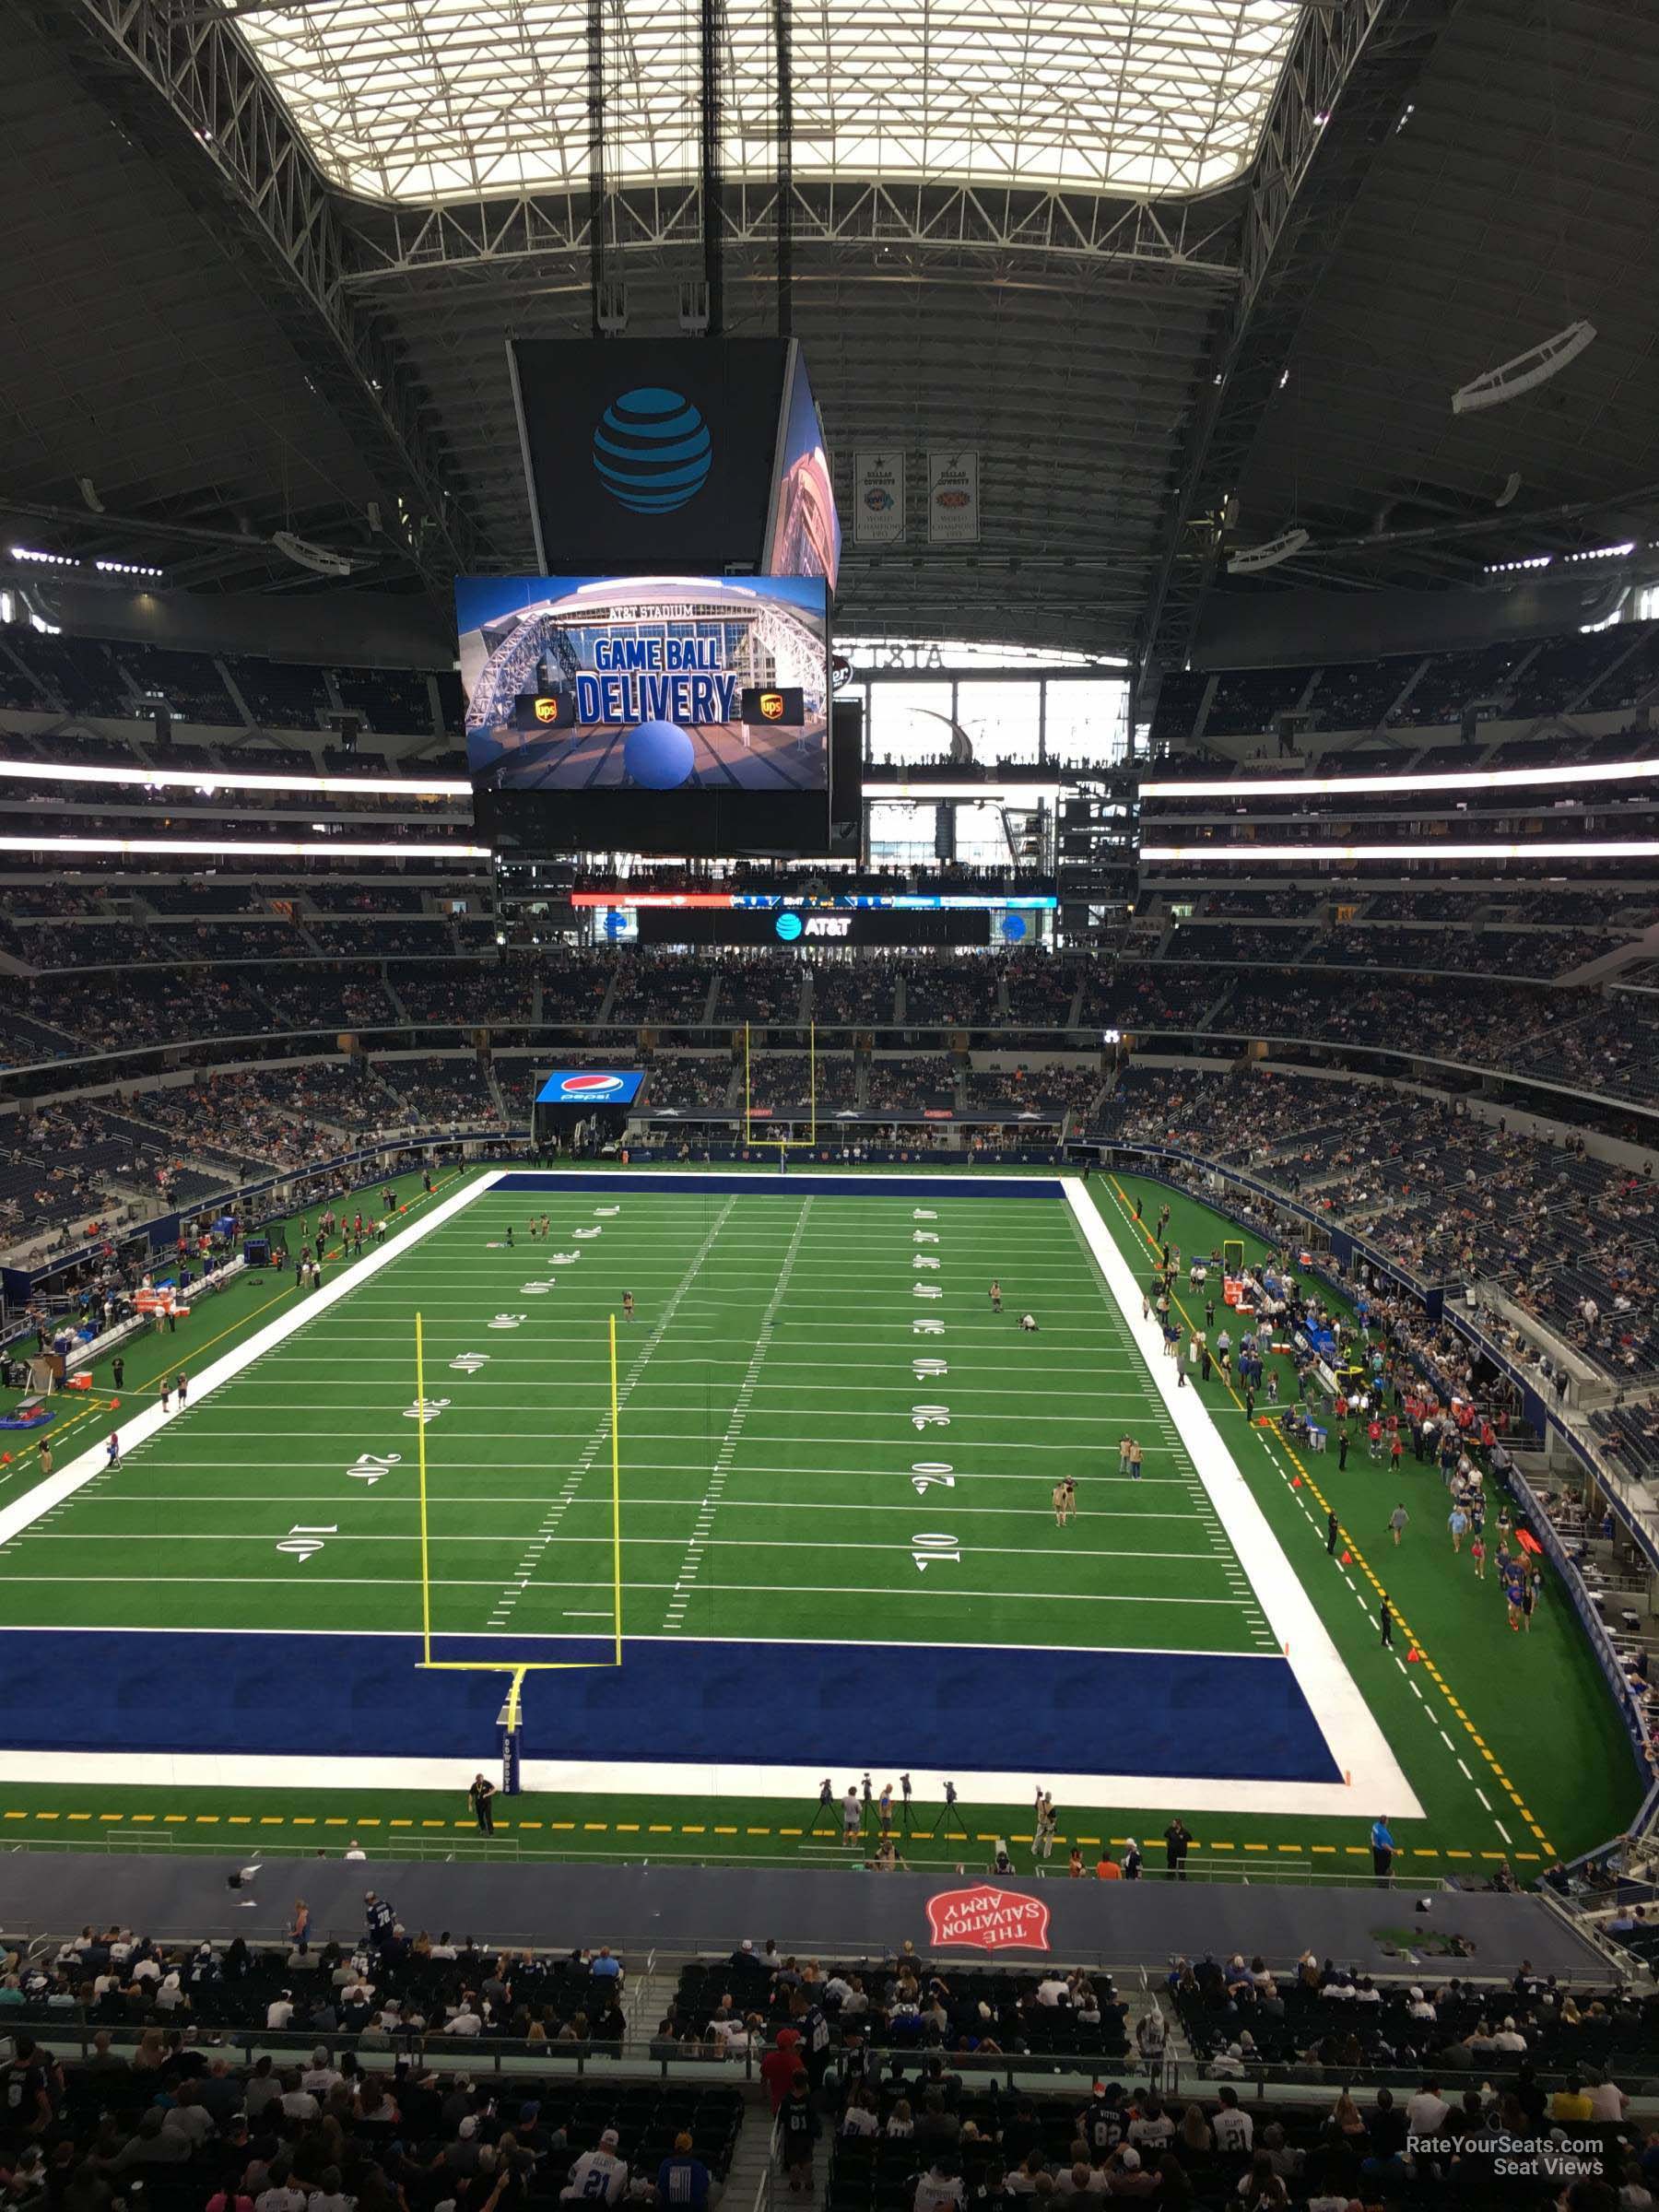 section 322, row 3 seat view  for football - at&t stadium (cowboys stadium)